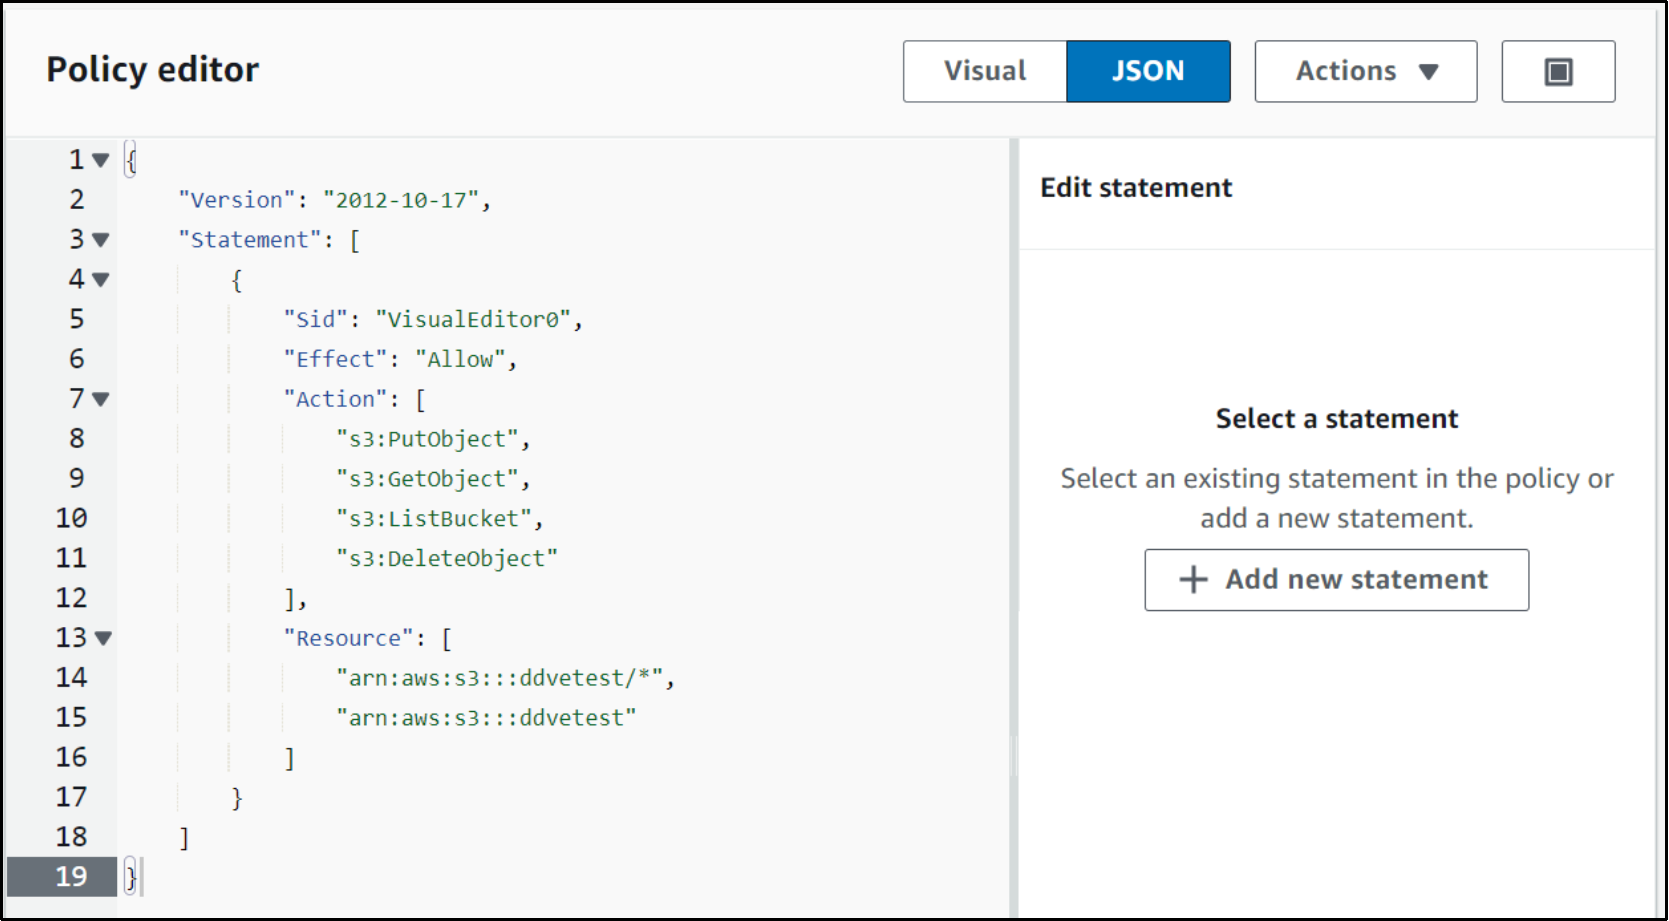 Policy editor page in AWS console to add policy configurations in JSON.